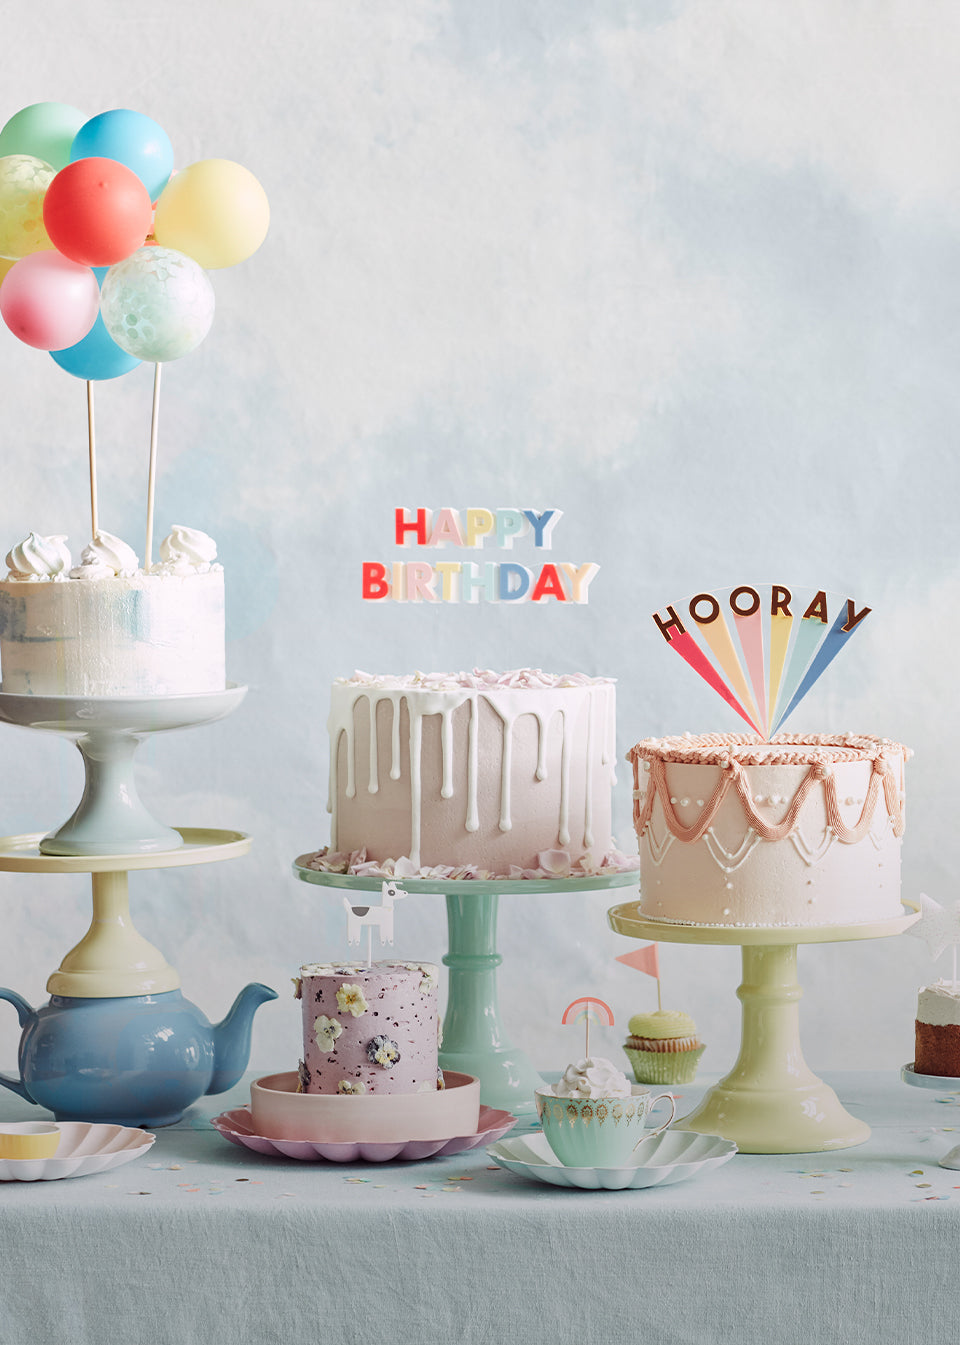 A row of cakes and cupcakes display a variety of candles, such as 'Happy Birthday' candles and statement cake toppers, and smaller designs including rainbows and animals.